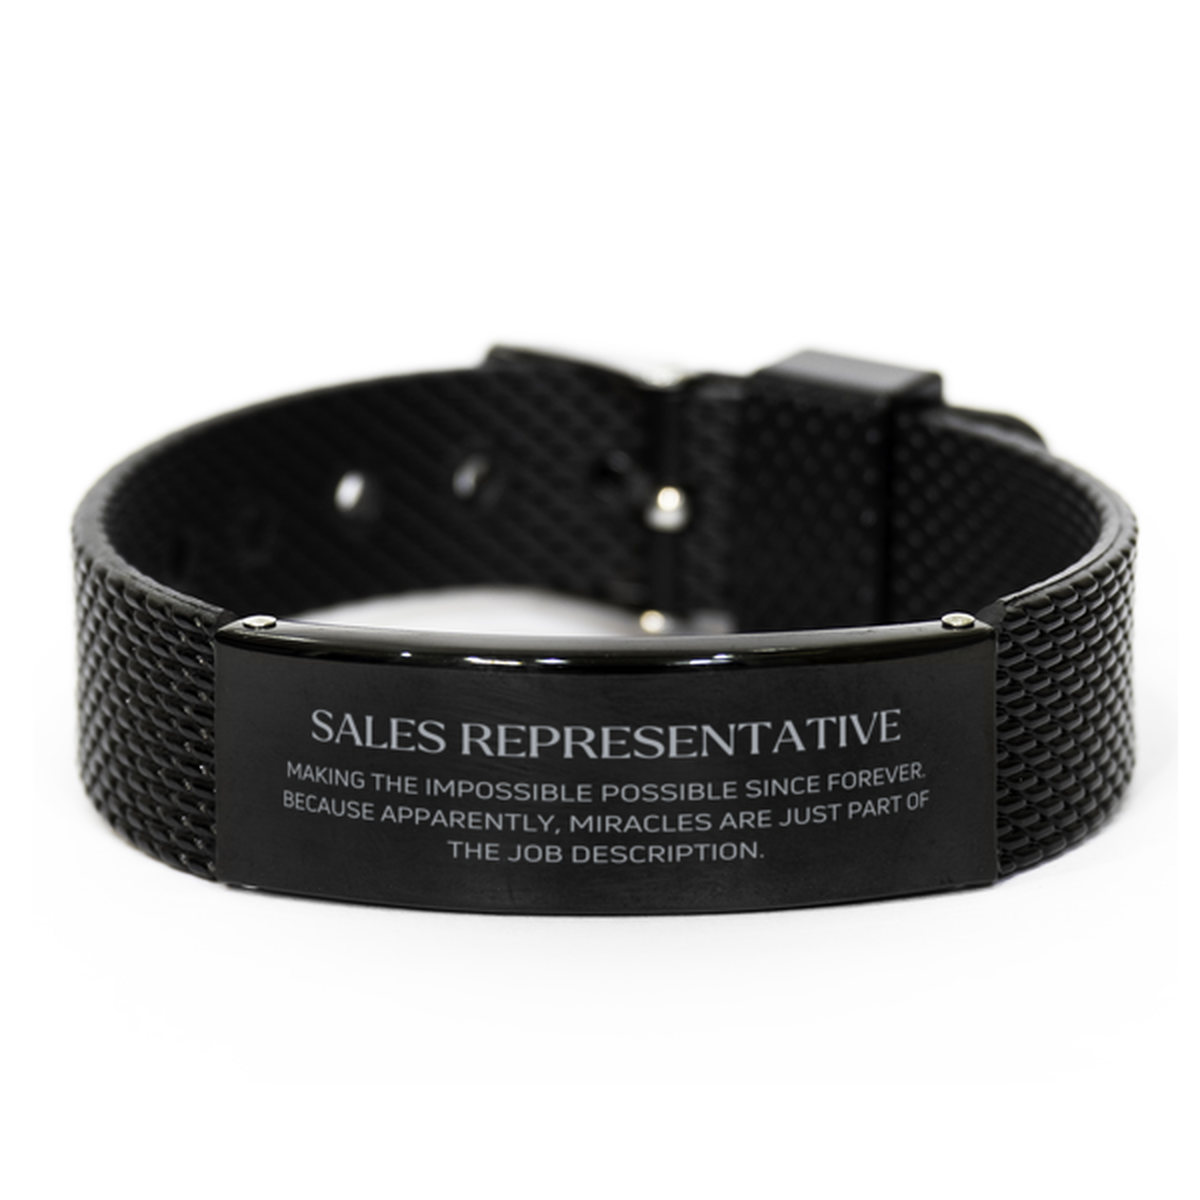 Funny Sales Representative Gifts, Miracles are just part of the job description, Inspirational Birthday Black Shark Mesh Bracelet For Sales Representative, Men, Women, Coworkers, Friends, Boss